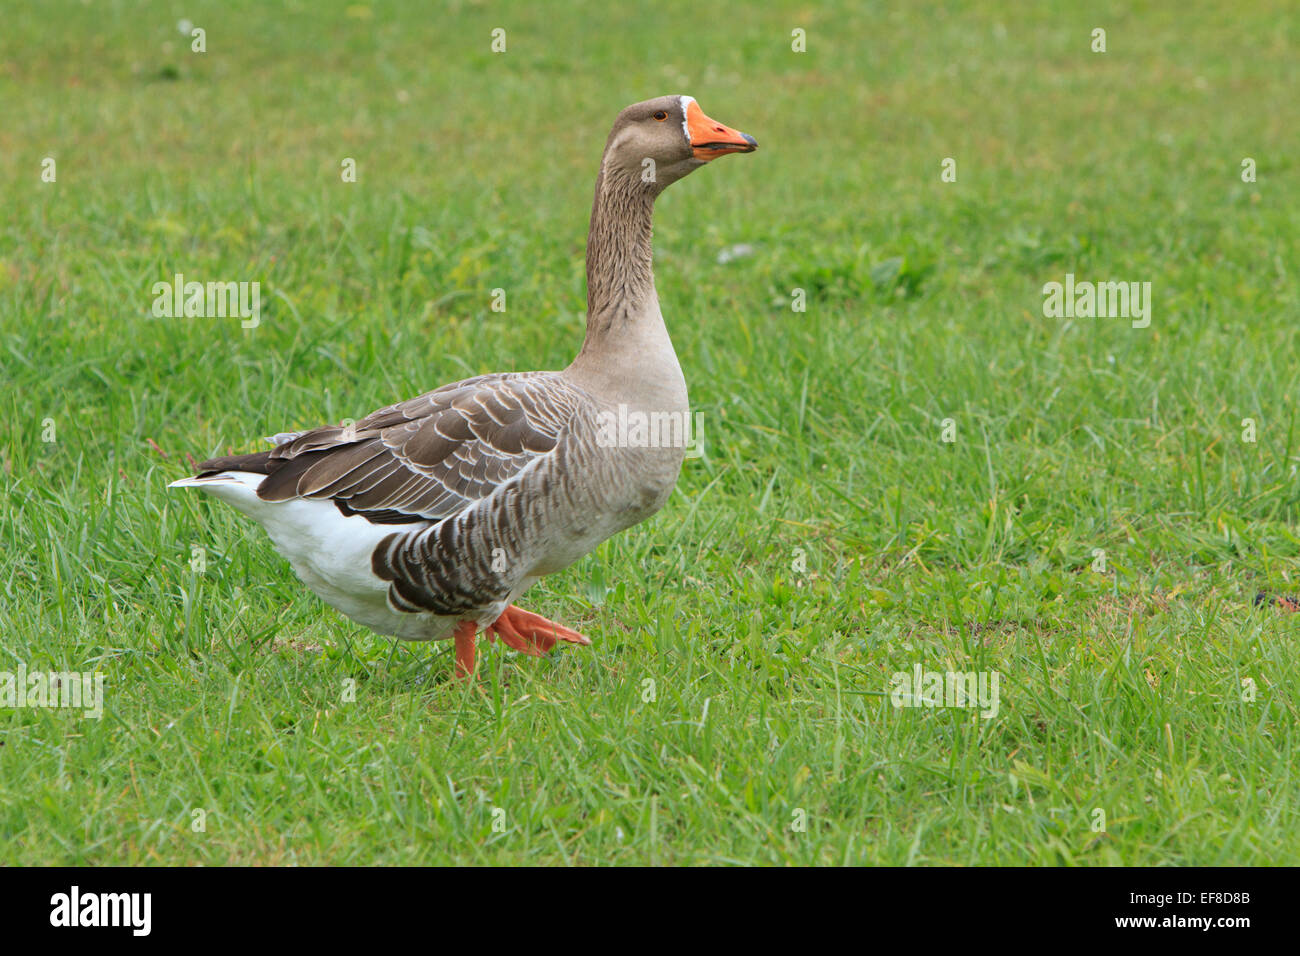 Greylag goose (Anser anser) in a field Stock Photo